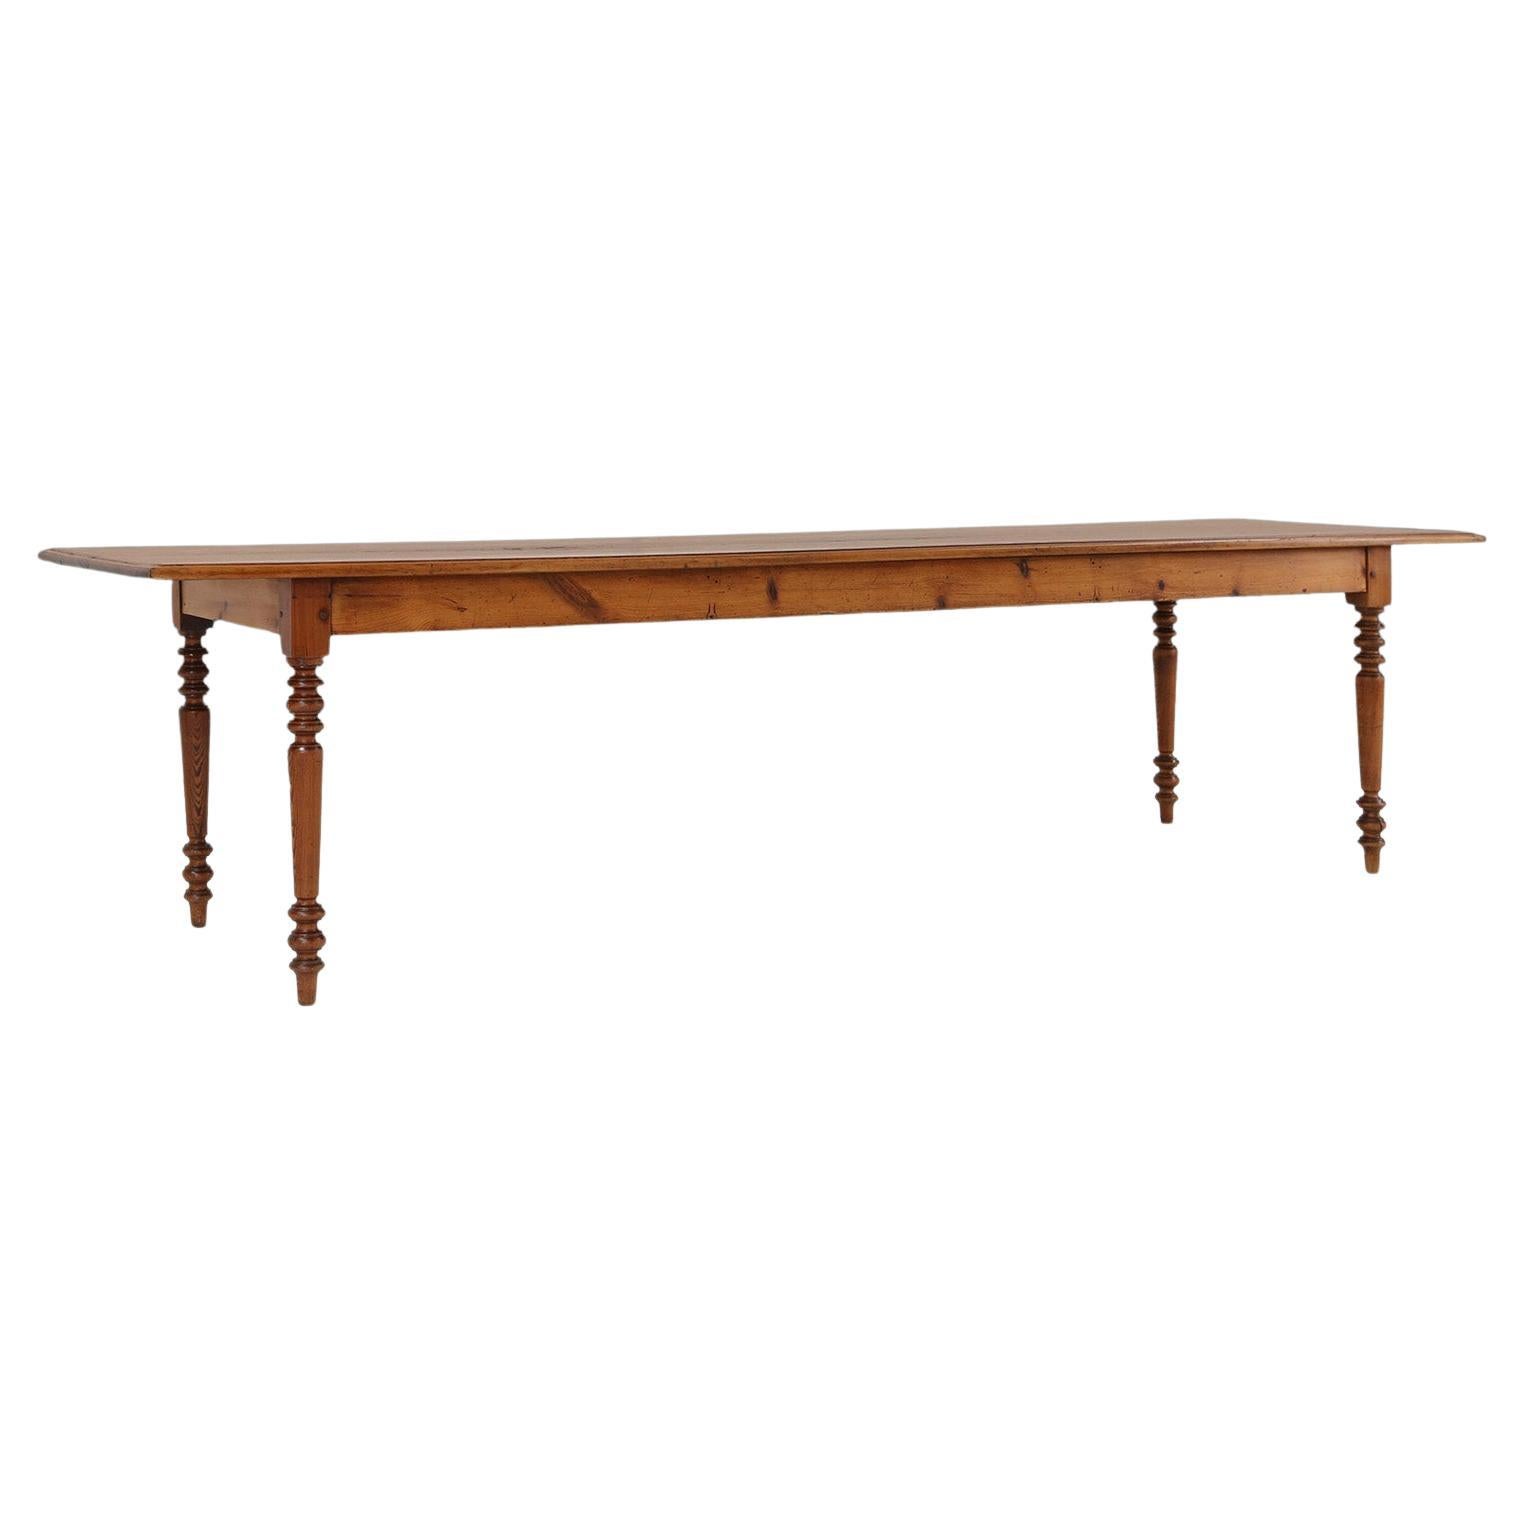 Large French rustic farmhouse table 19th century